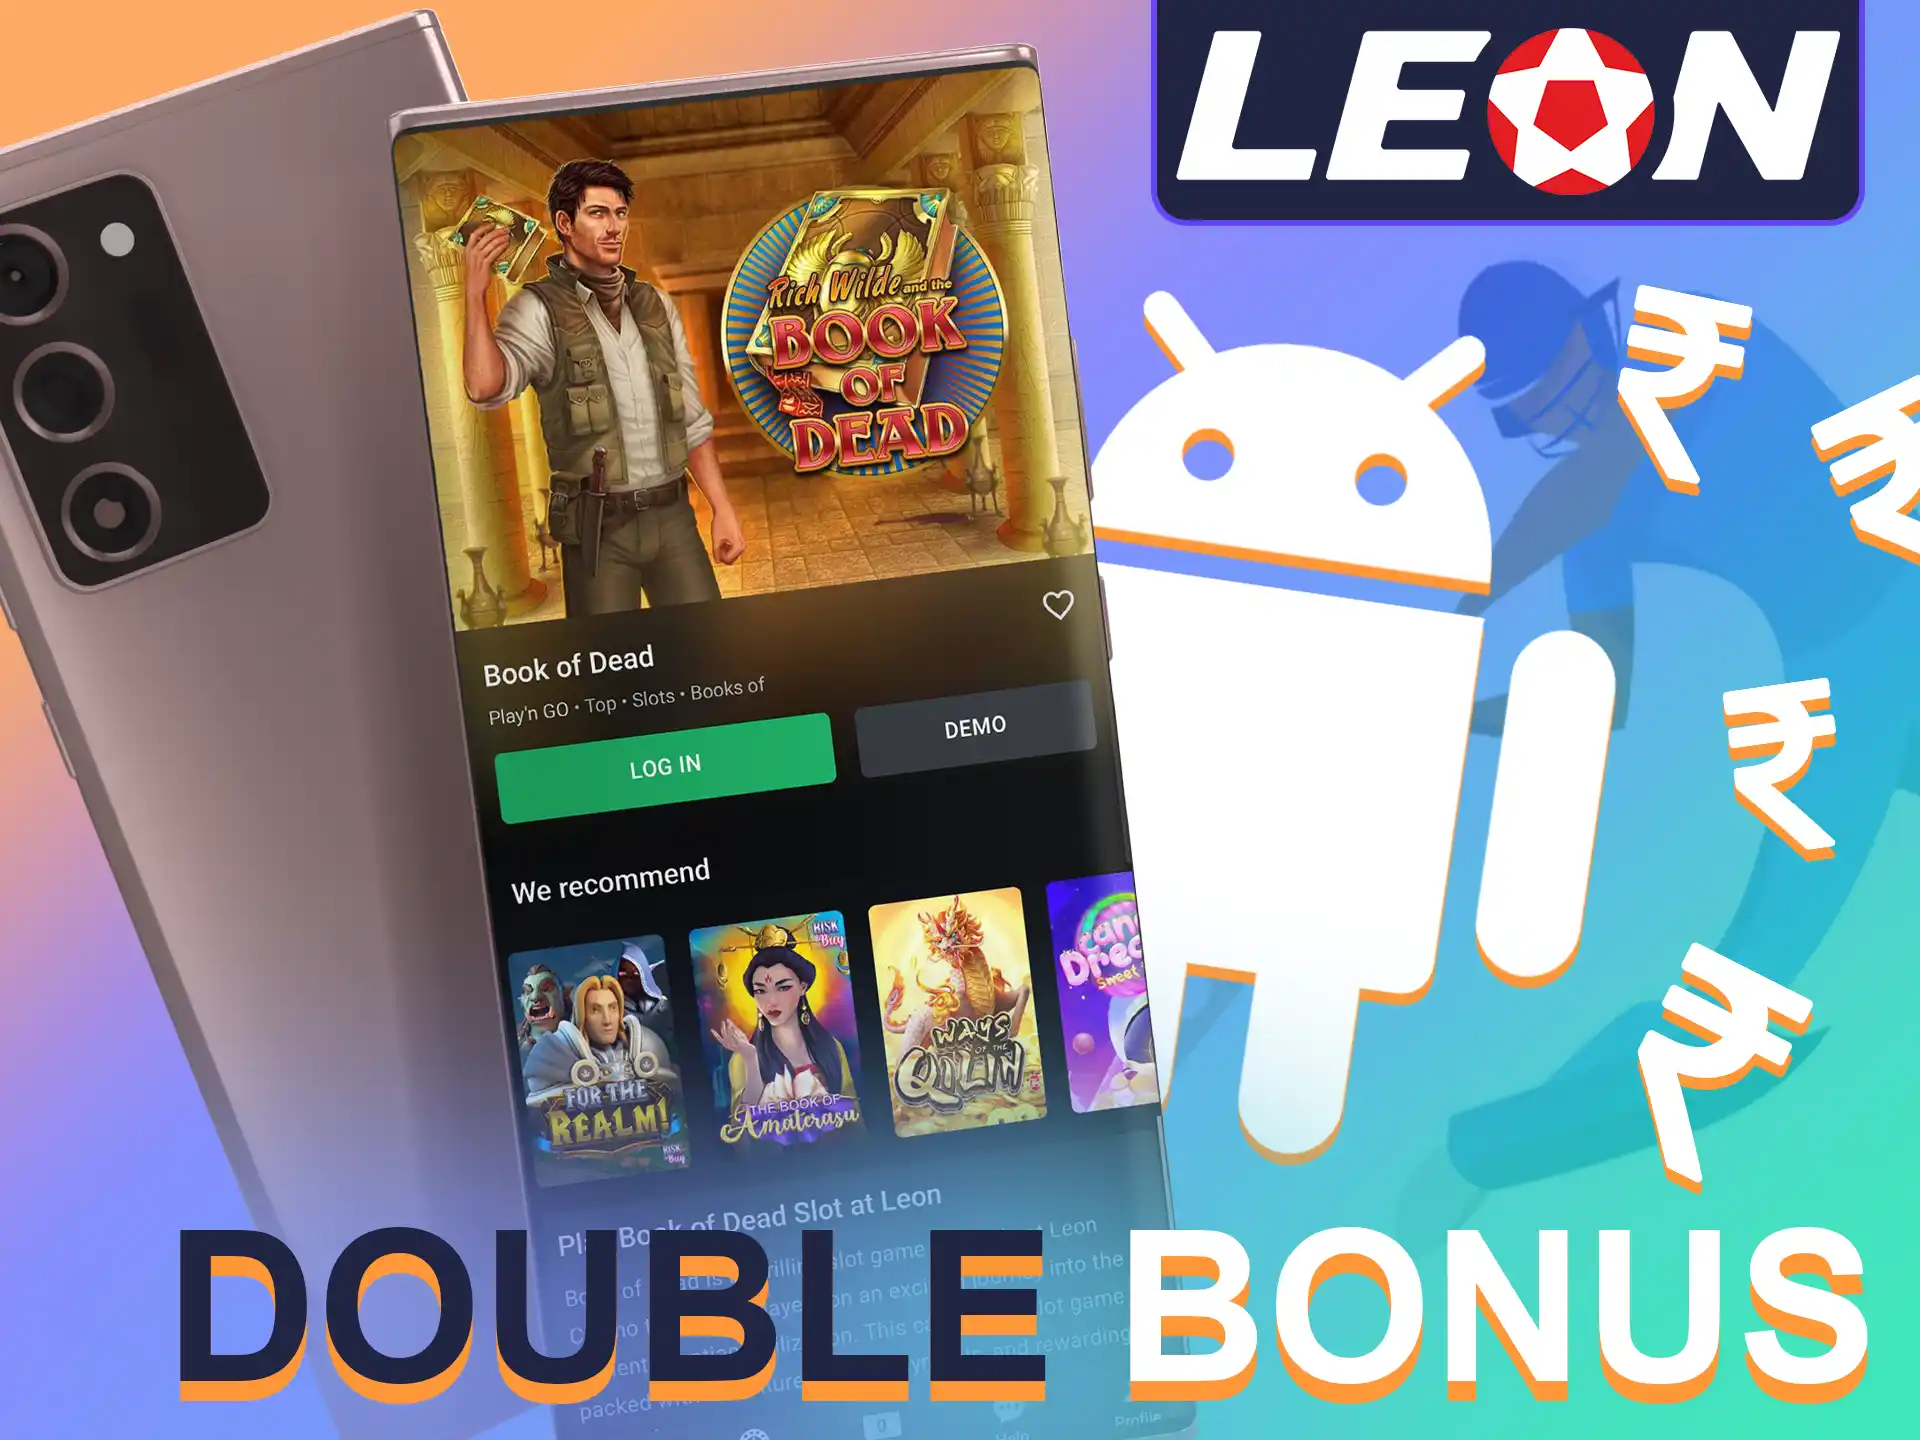 Download the Leon Bet app and get 500 INR free bets and 50 free spins on the Book of Dead slot game.